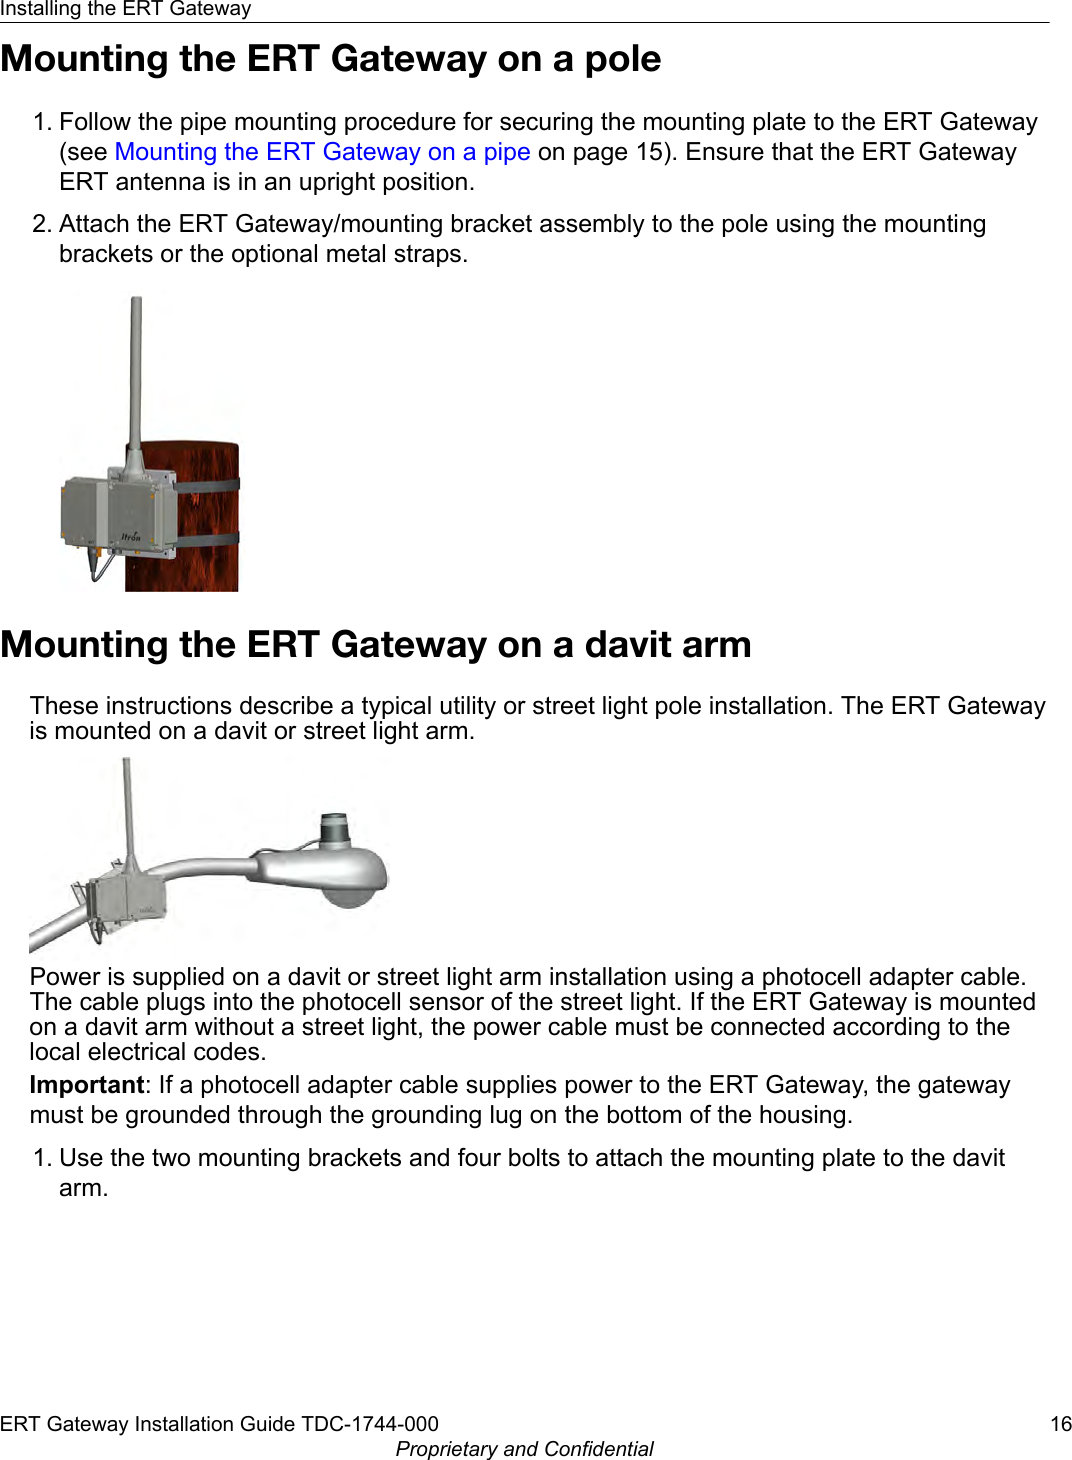 Mounting the ERT Gateway on a pole1. Follow the pipe mounting procedure for securing the mounting plate to the ERT Gateway(see Mounting the ERT Gateway on a pipe on page 15). Ensure that the ERT GatewayERT antenna is in an upright position.2. Attach the ERT Gateway/mounting bracket assembly to the pole using the mountingbrackets or the optional metal straps.Mounting the ERT Gateway on a davit armThese instructions describe a typical utility or street light pole installation. The ERT Gatewayis mounted on a davit or street light arm.Power is supplied on a davit or street light arm installation using a photocell adapter cable.The cable plugs into the photocell sensor of the street light. If the ERT Gateway is mountedon a davit arm without a street light, the power cable must be connected according to thelocal electrical codes.Important: If a photocell adapter cable supplies power to the ERT Gateway, the gatewaymust be grounded through the grounding lug on the bottom of the housing.1. Use the two mounting brackets and four bolts to attach the mounting plate to the davitarm.Installing the ERT GatewayERT Gateway Installation Guide TDC-1744-000 16Proprietary and Confidential